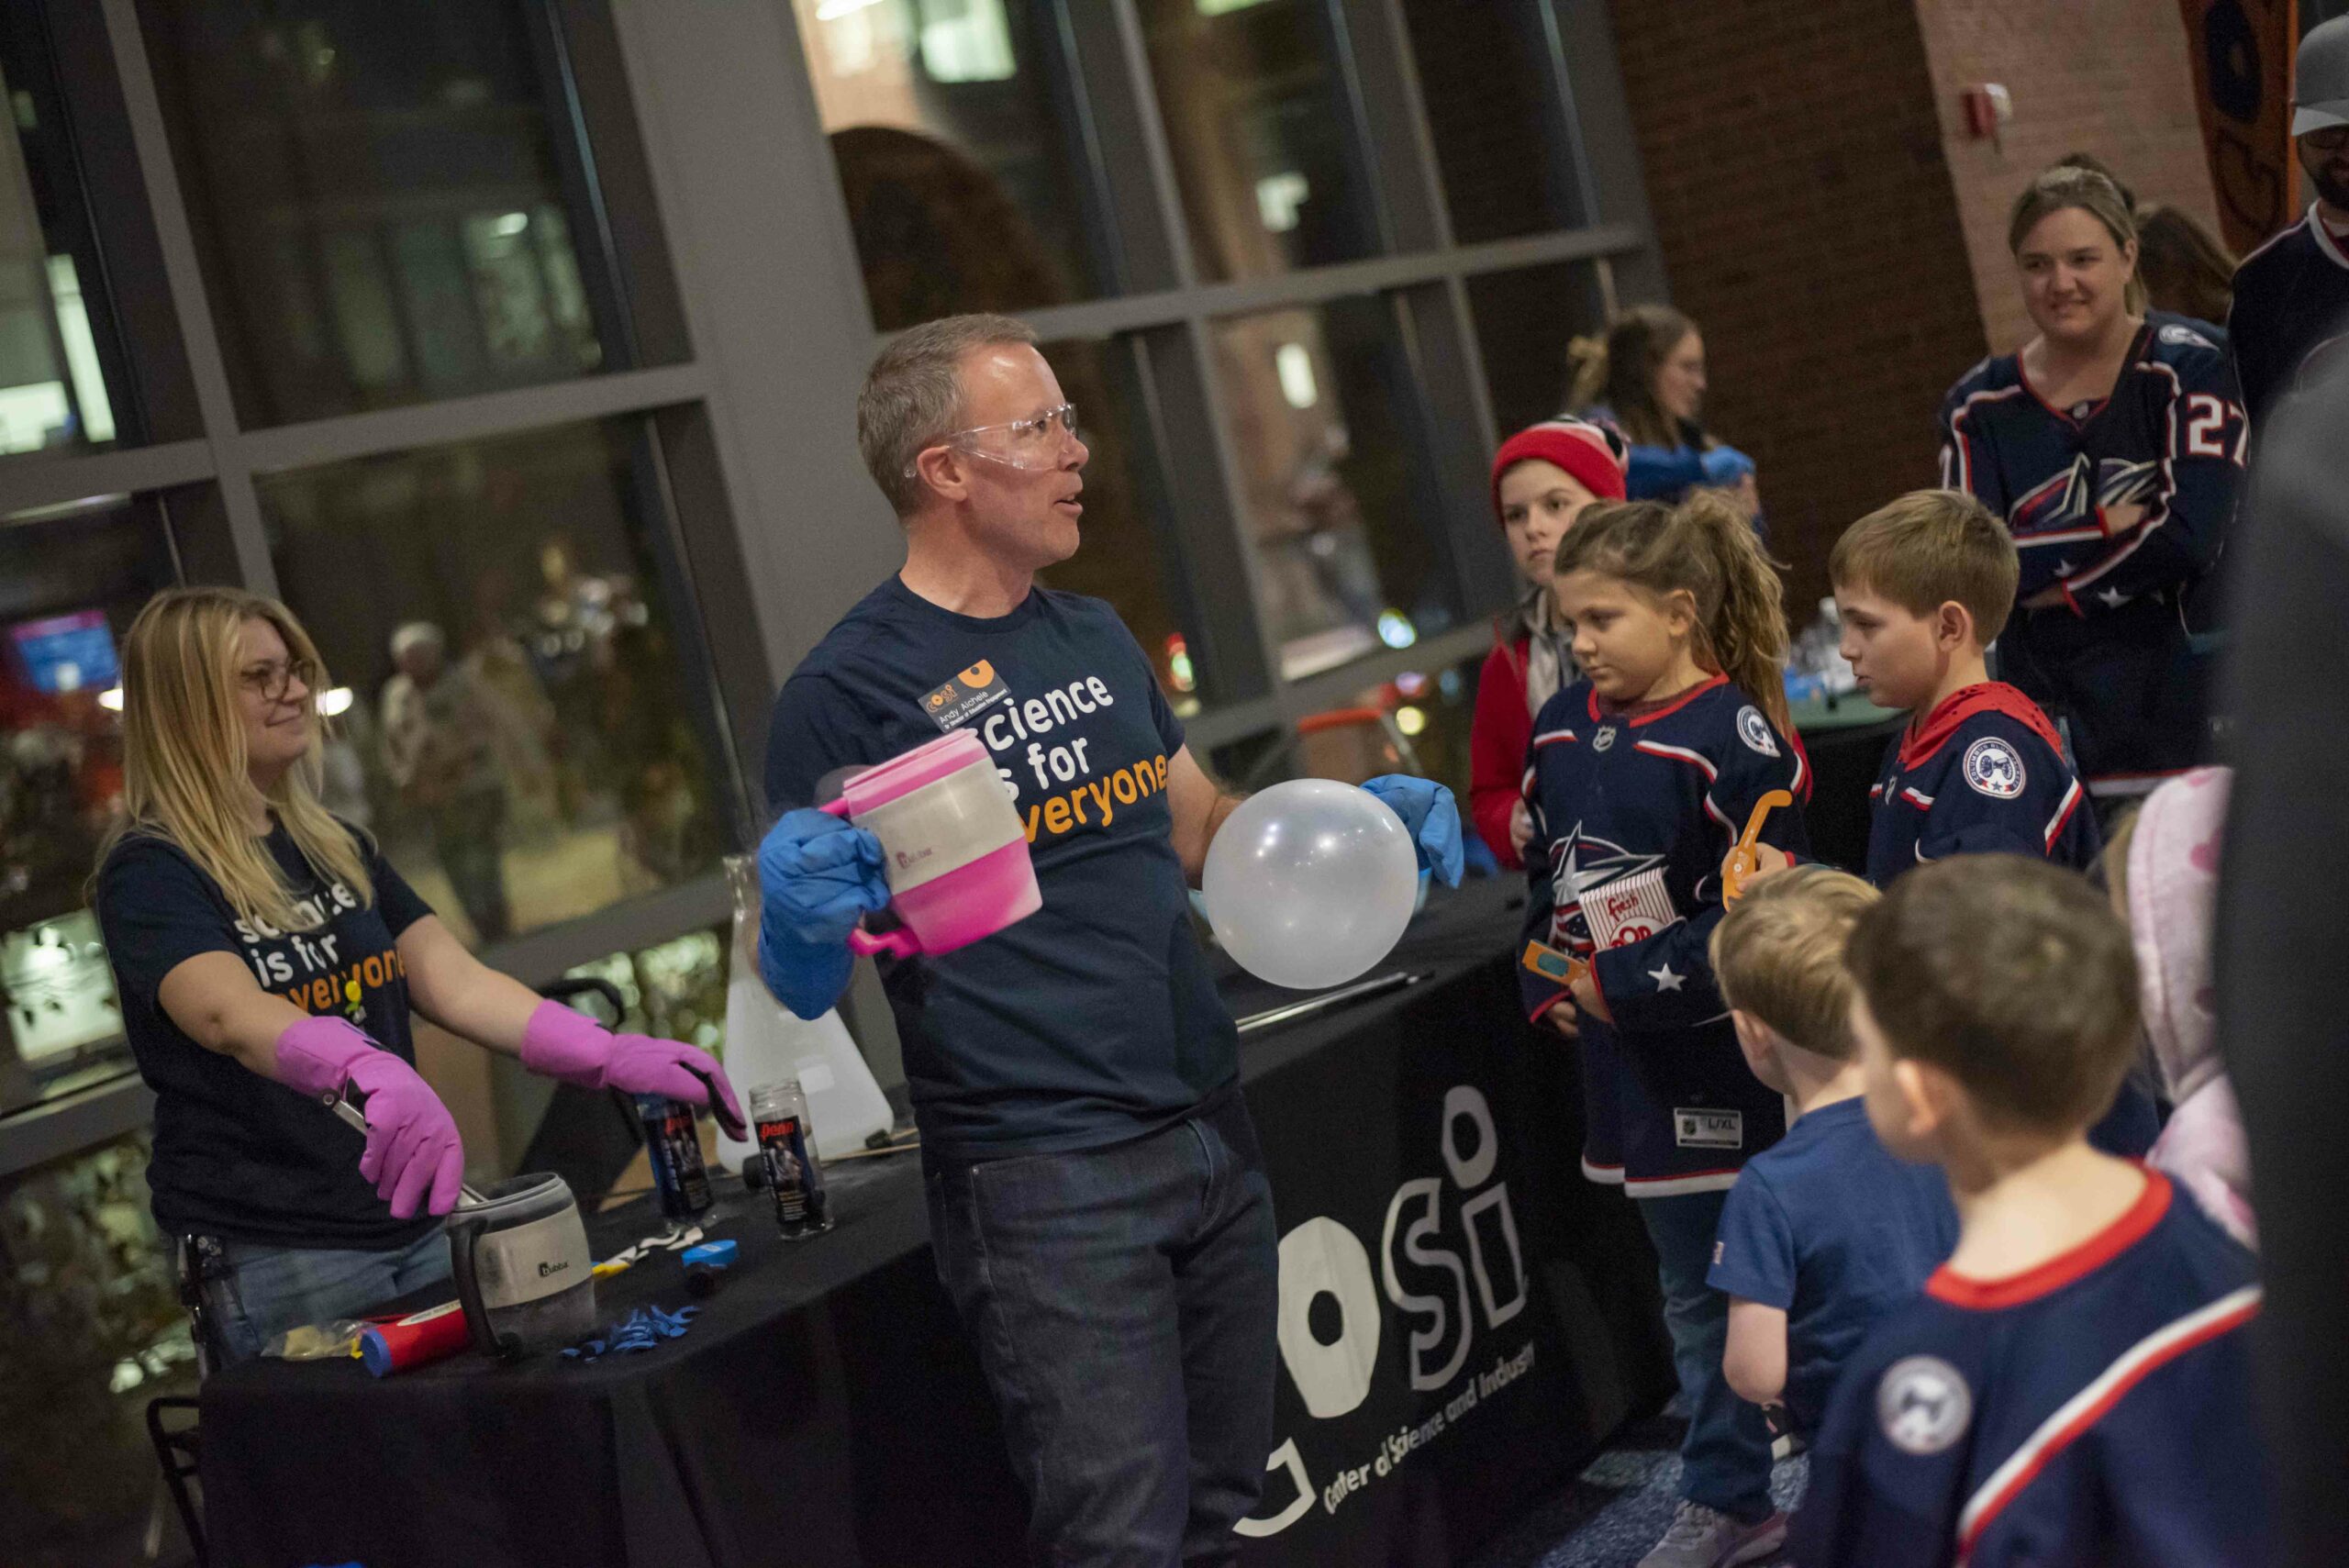 COSI employees doing a science demonstration at a Columbus Blue Jackets game with children and adults watching.